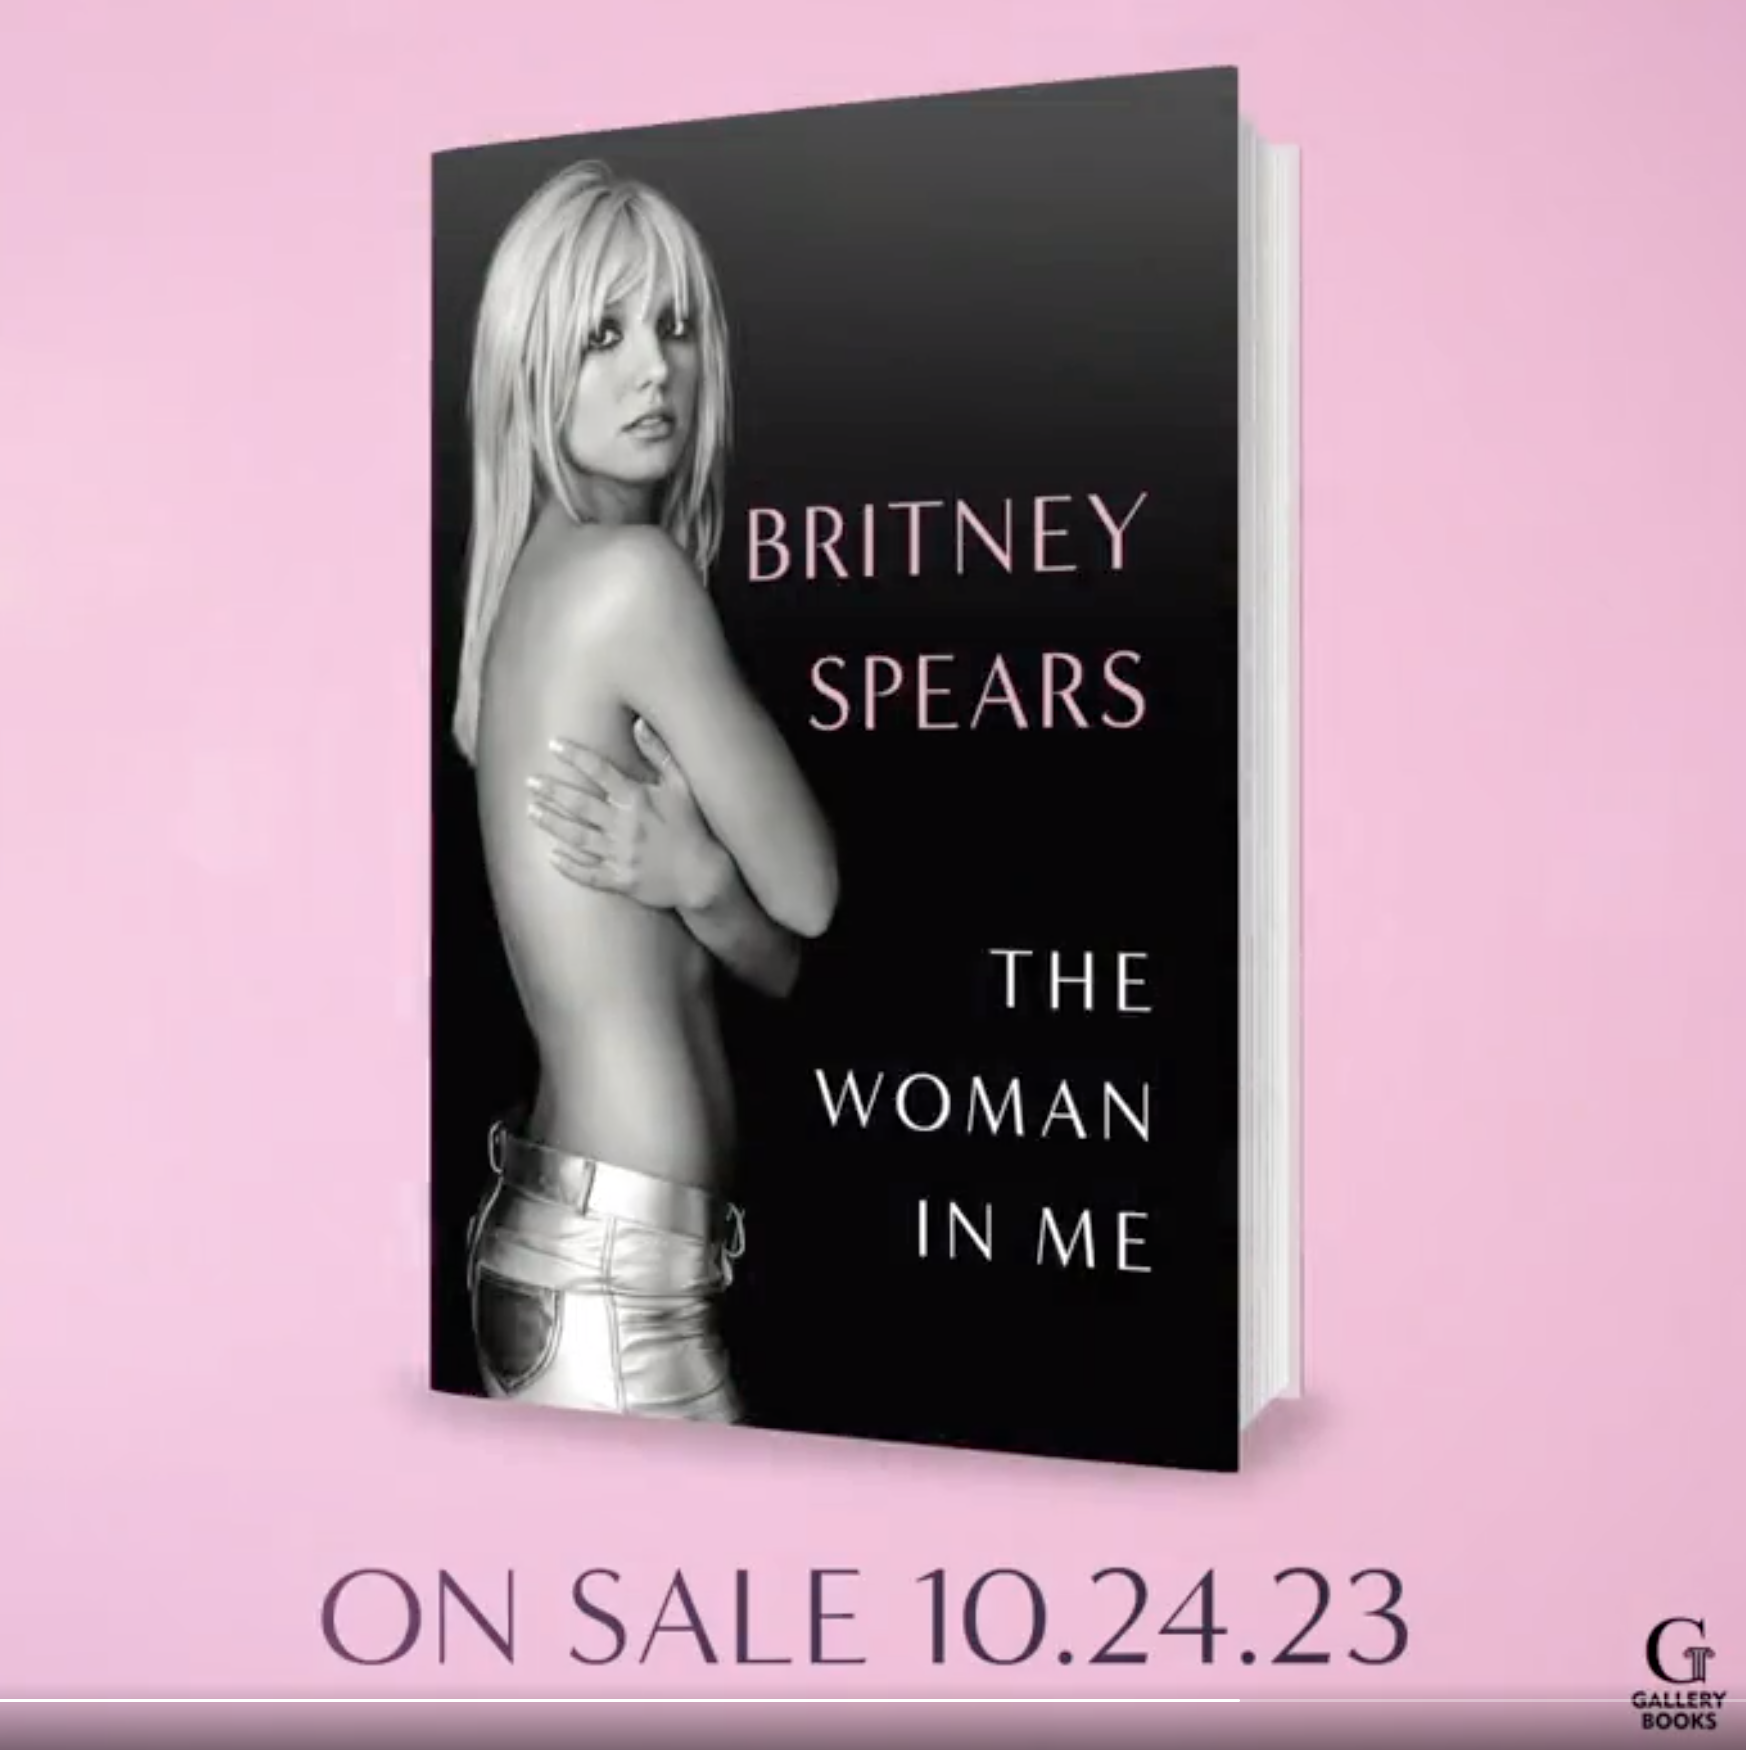 An old photo of a shirtless britney covering herself with her arms on the book cover